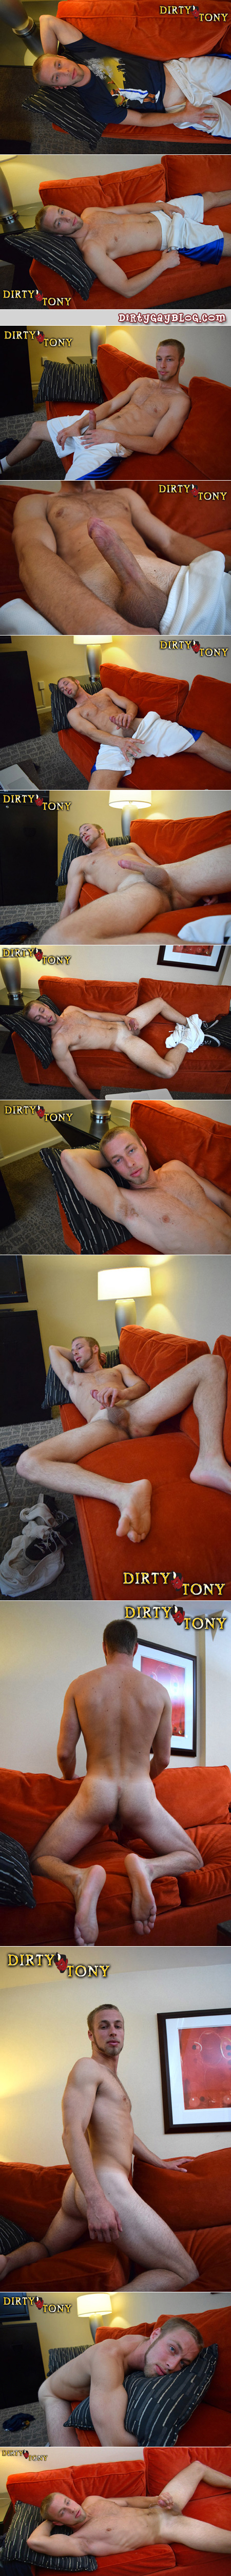 Hairy blonde guy jacking off on the couch through his athletic shorts.